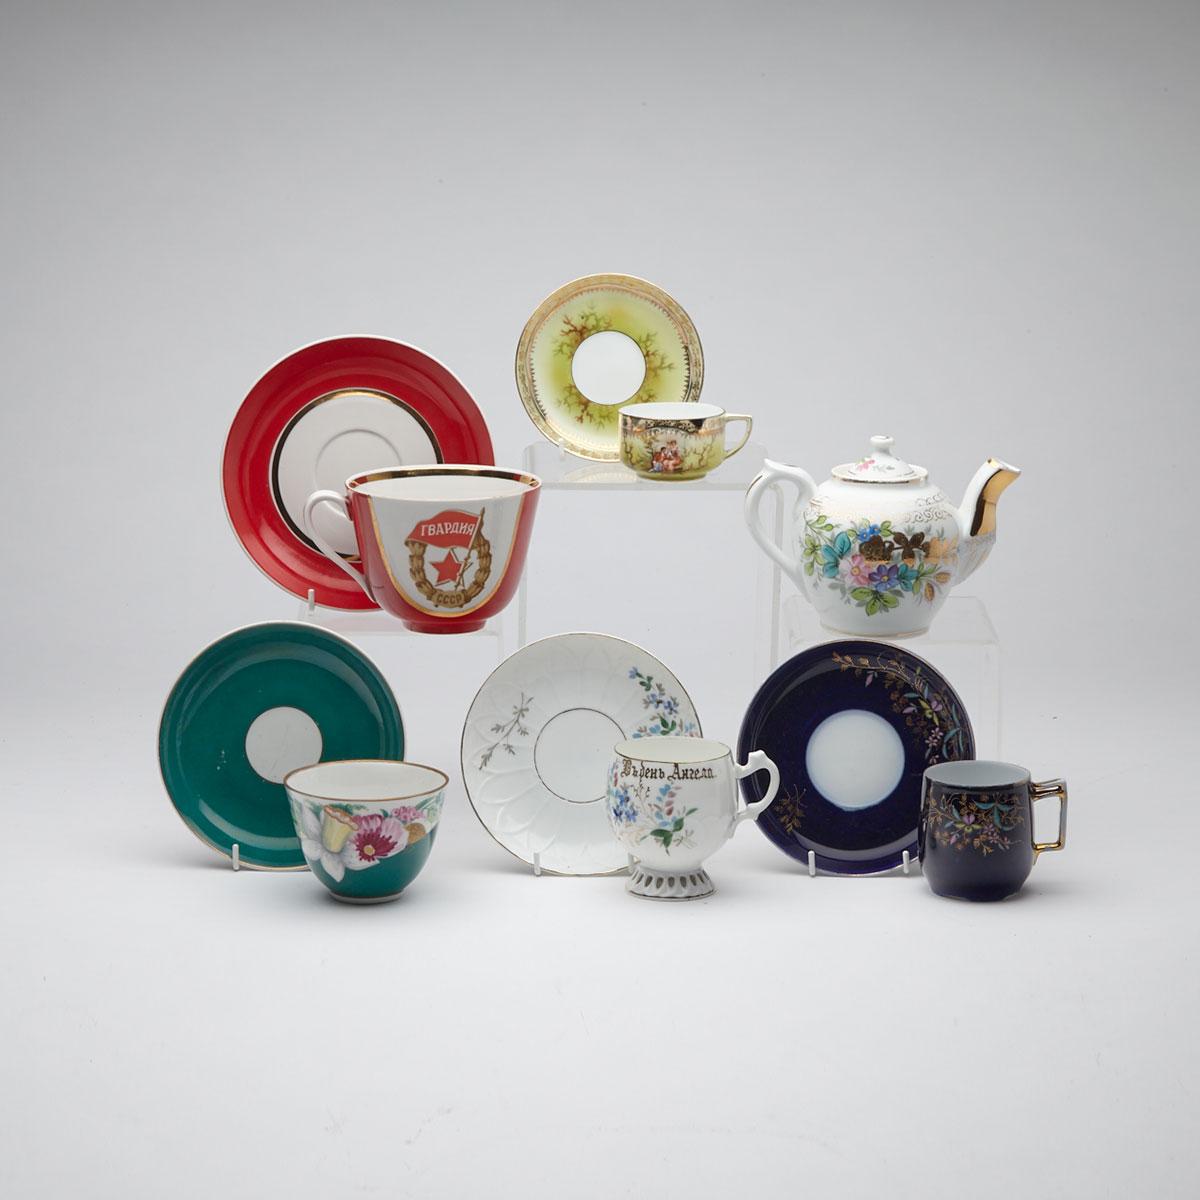 Group of Three Kuznetsov Cups and Saucers and a Teapot, Lomonosov Botanical Cup and Saucer and a Dulevo Guards Unit Cup and Saucer, mainly 20th century